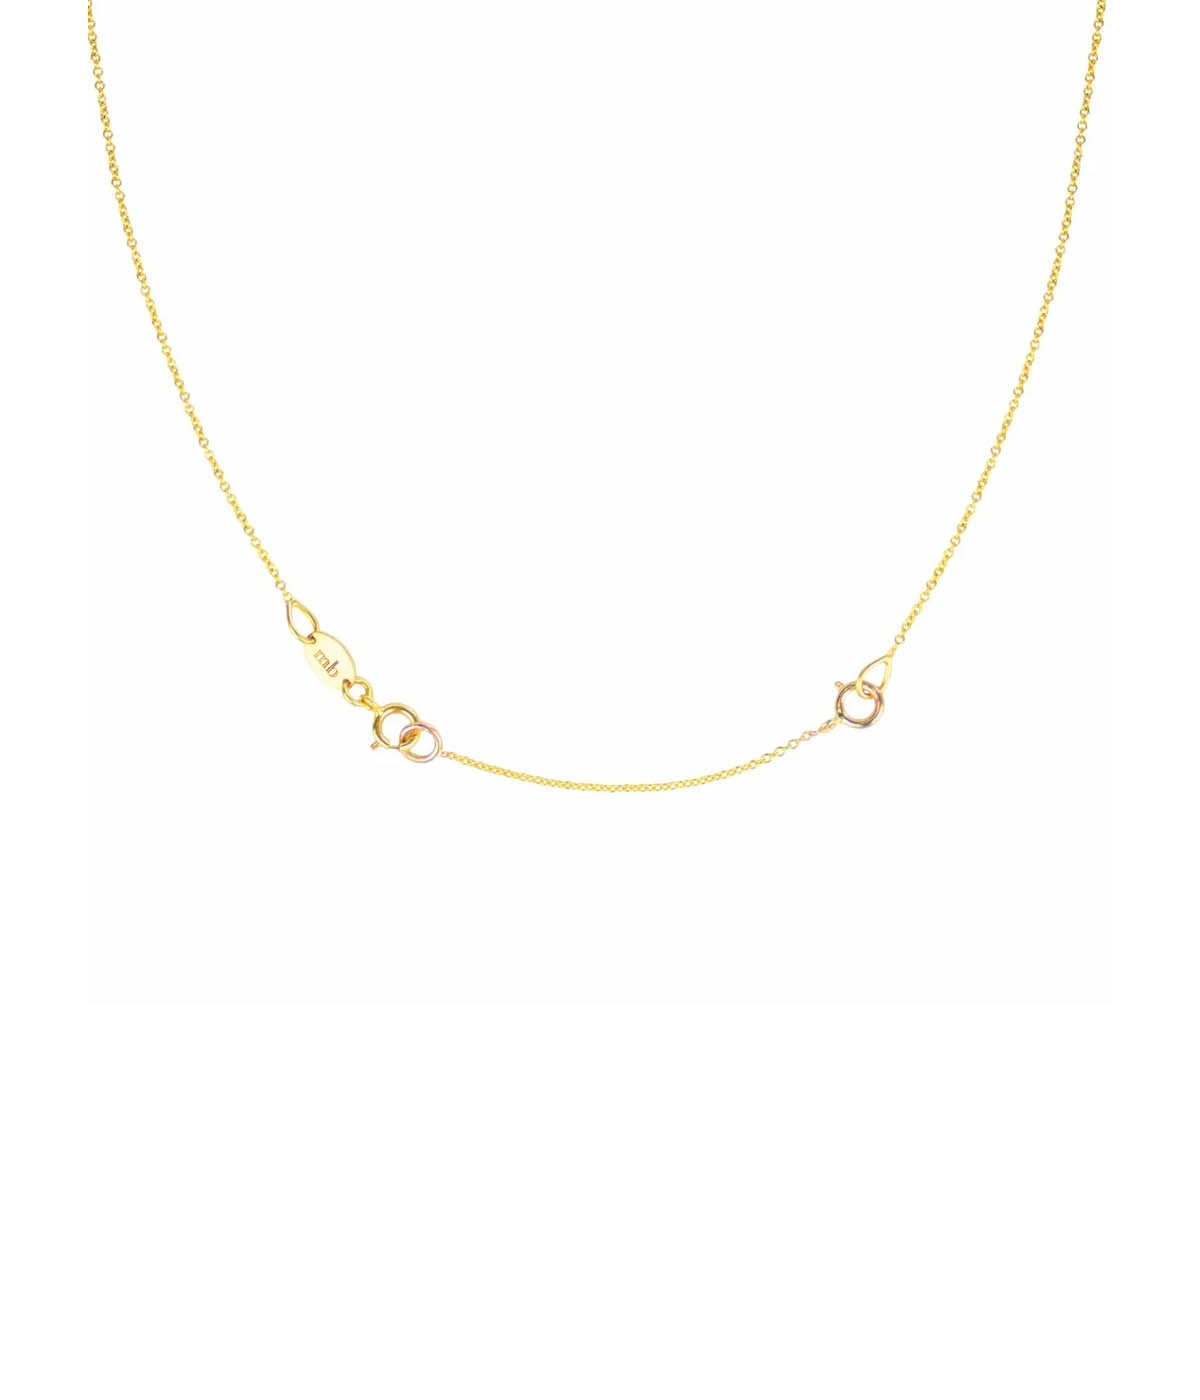 4 Inch Chain Extender in Yellow Gold